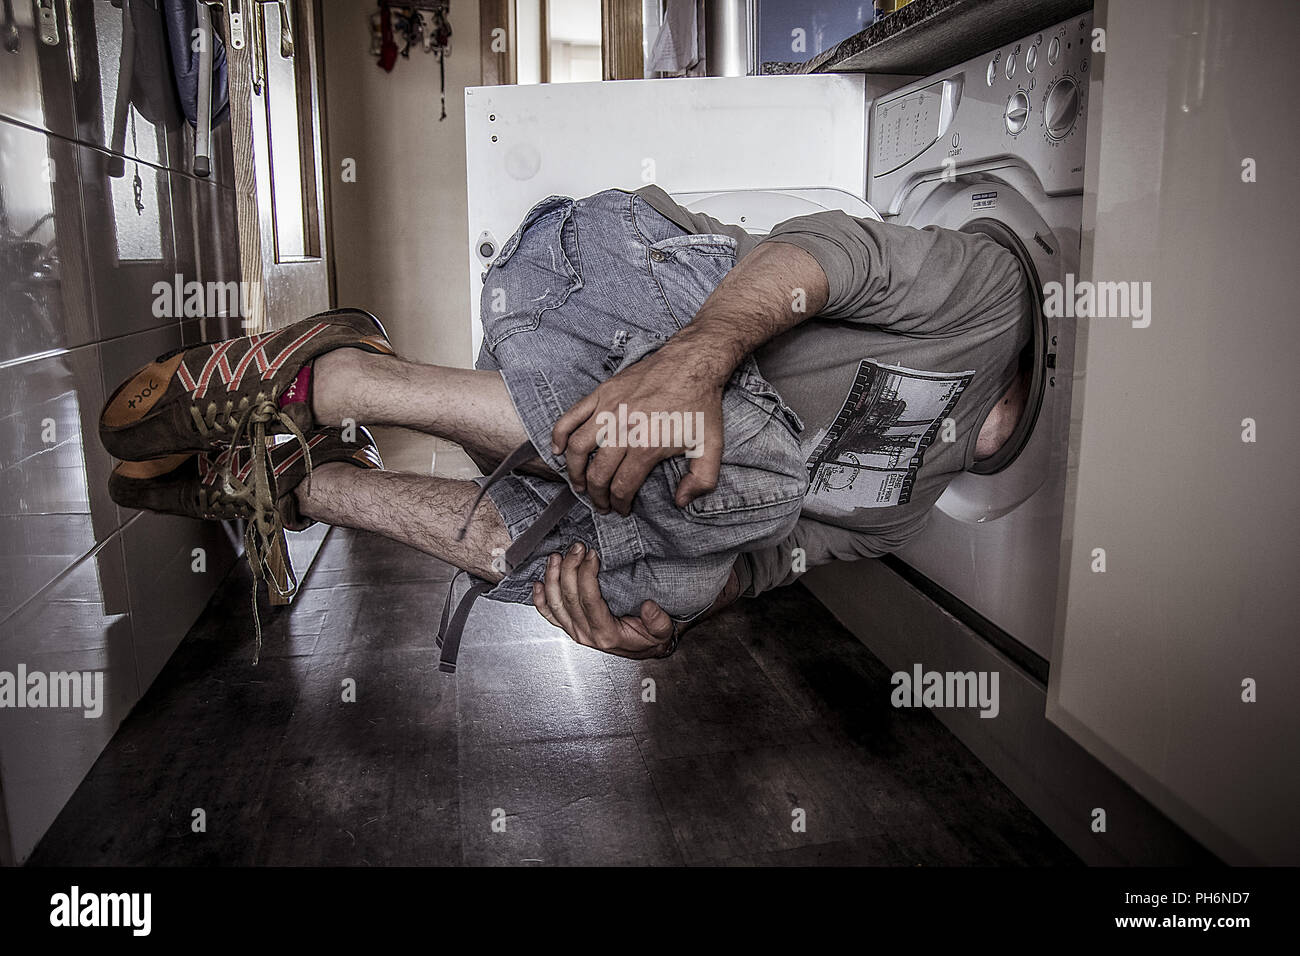 Man Flying With His Head Stuck In A Washing Machine Stock Photo Alamy